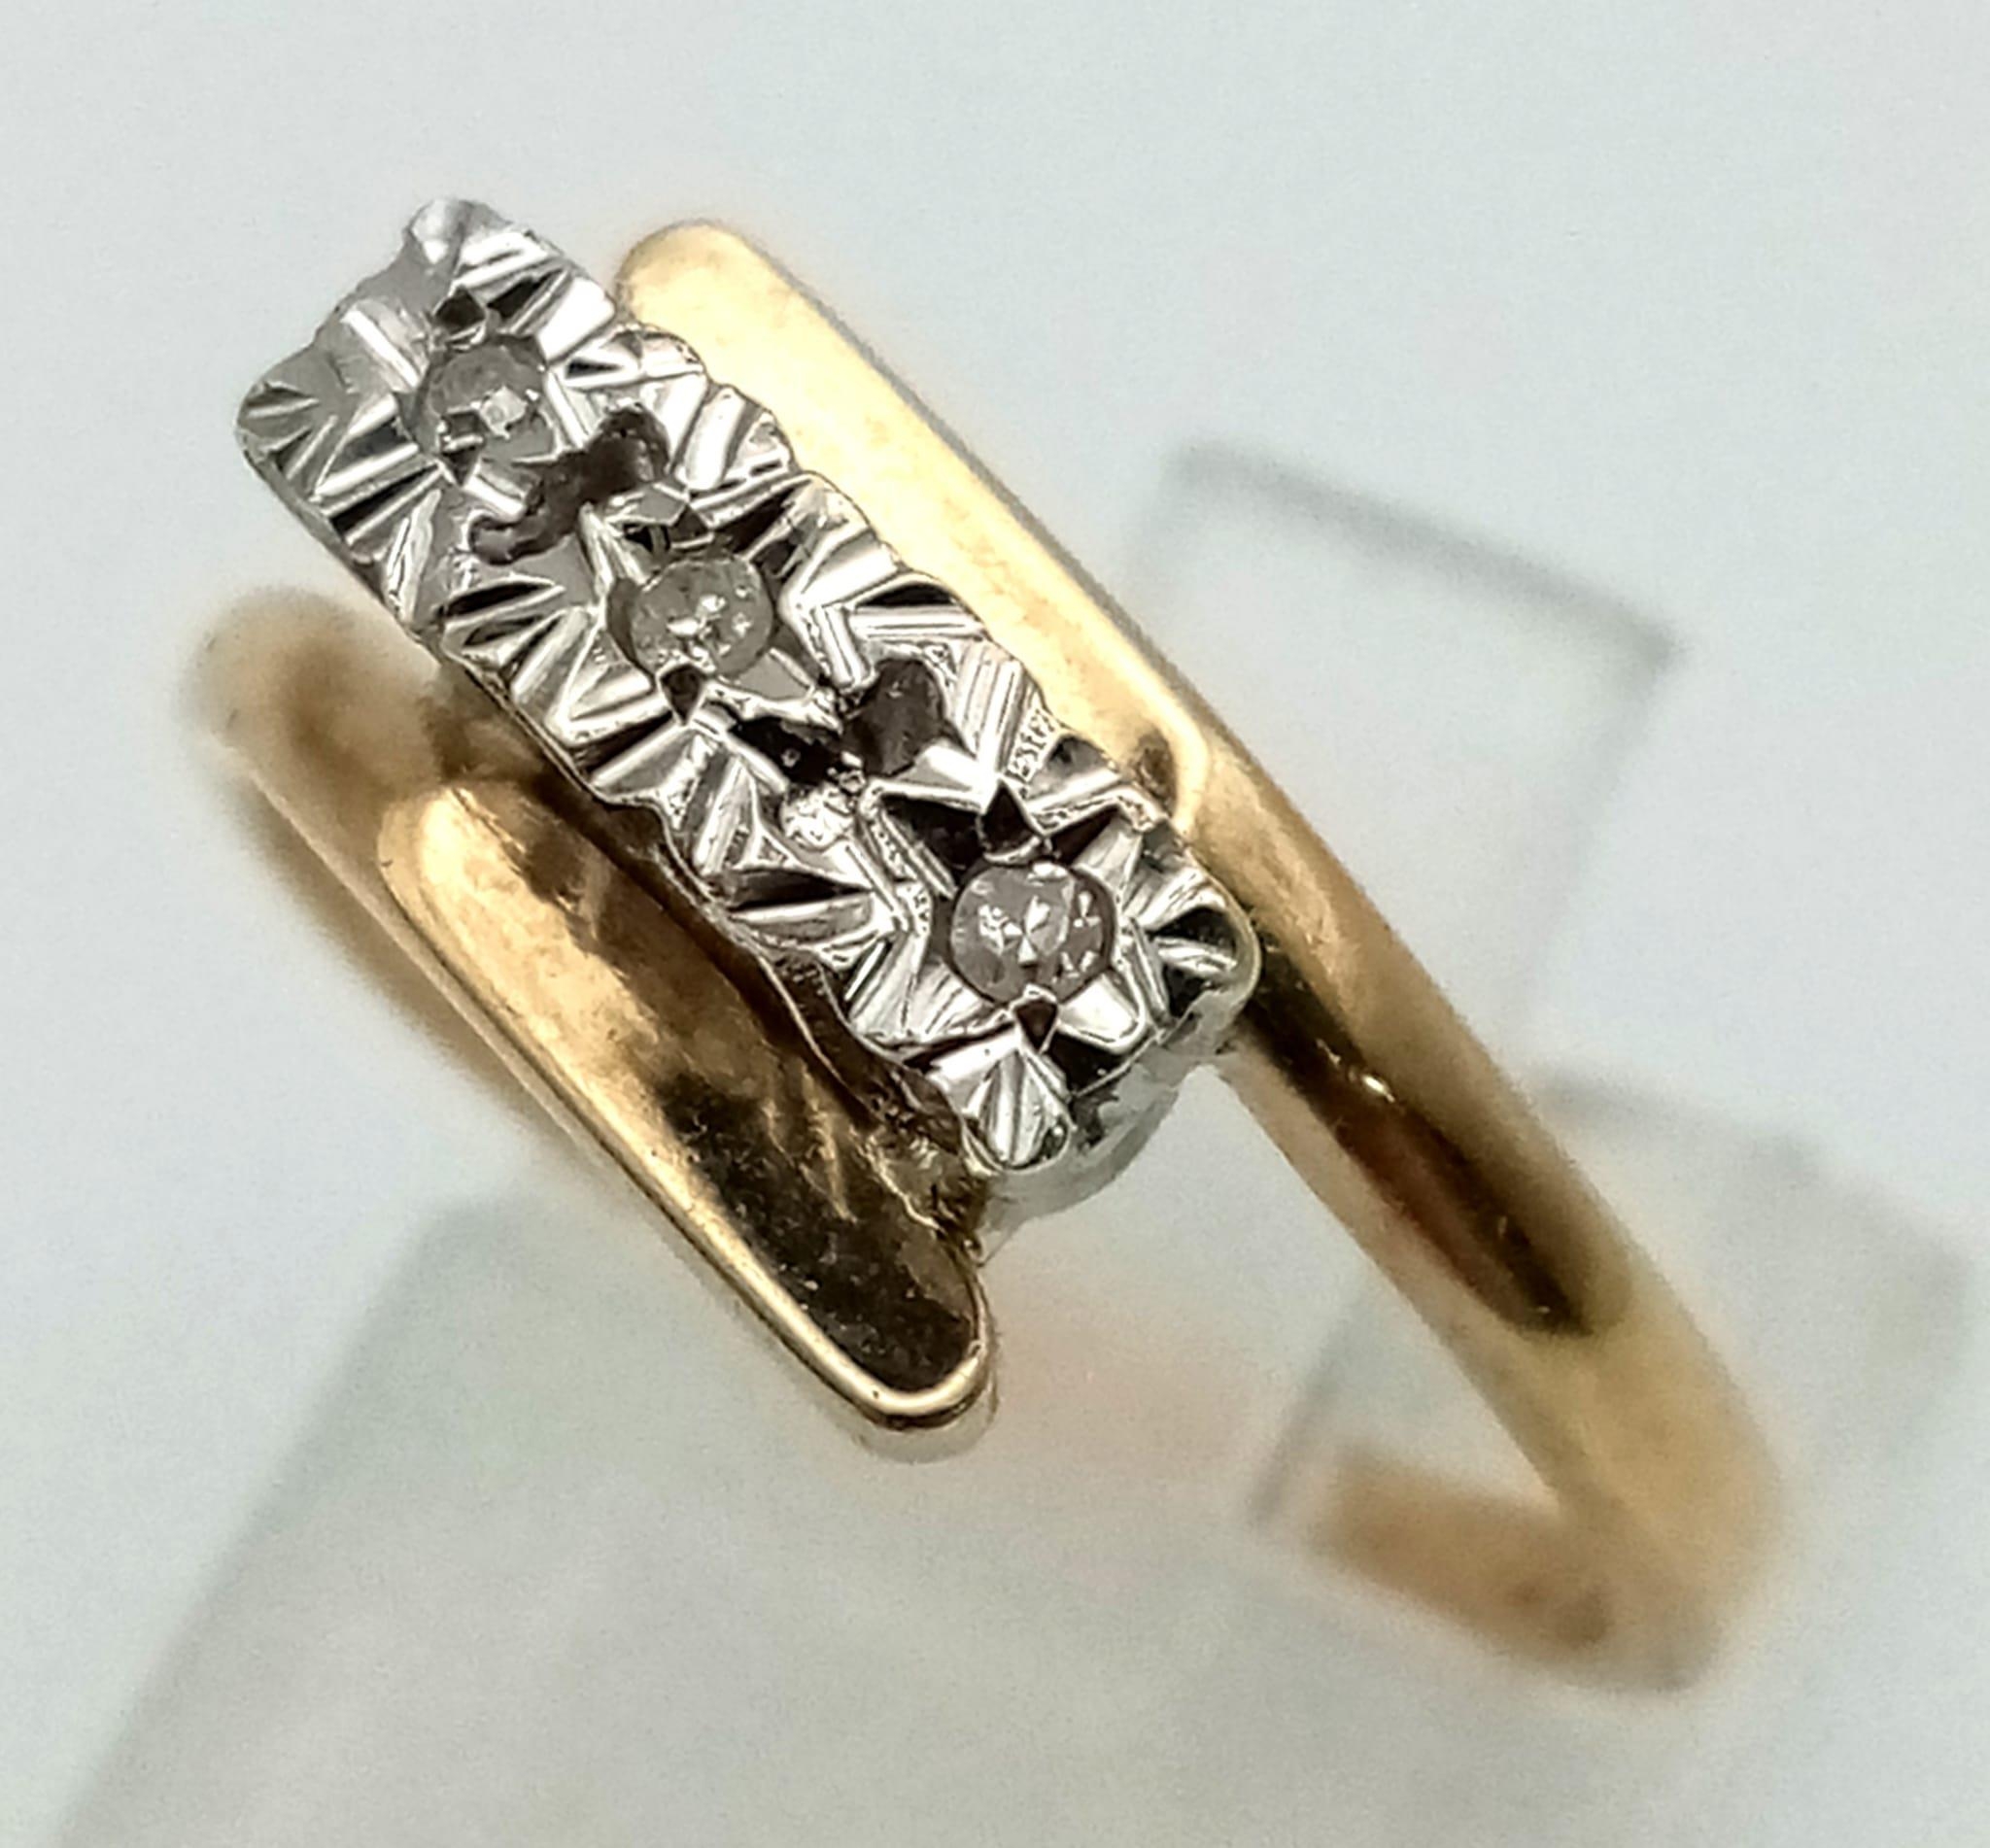 A mid century star set diamond ring set in 9k yellow gold, Ring Size N, Total Weight 2.8 grams. - Image 2 of 5